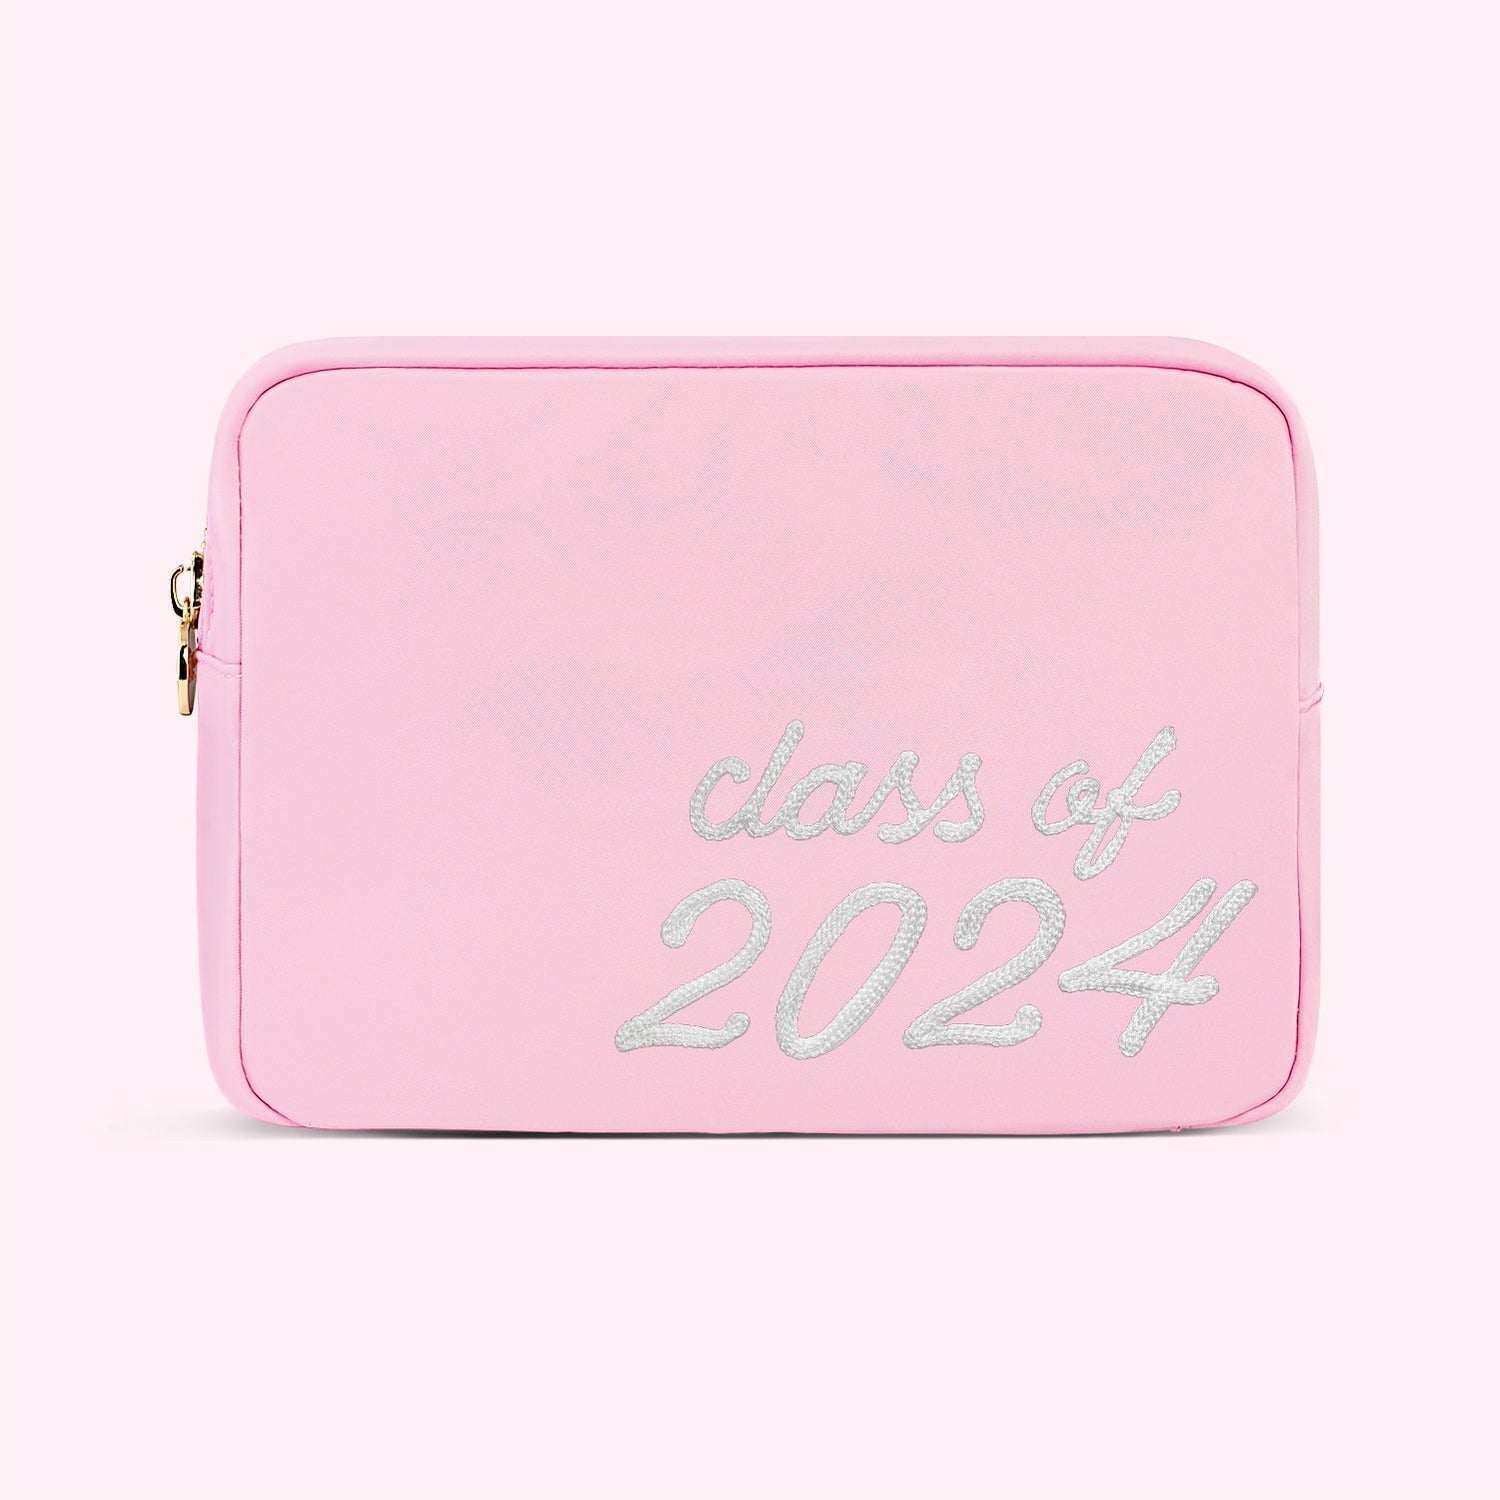 Customizer Class of 2024 Large Pouch